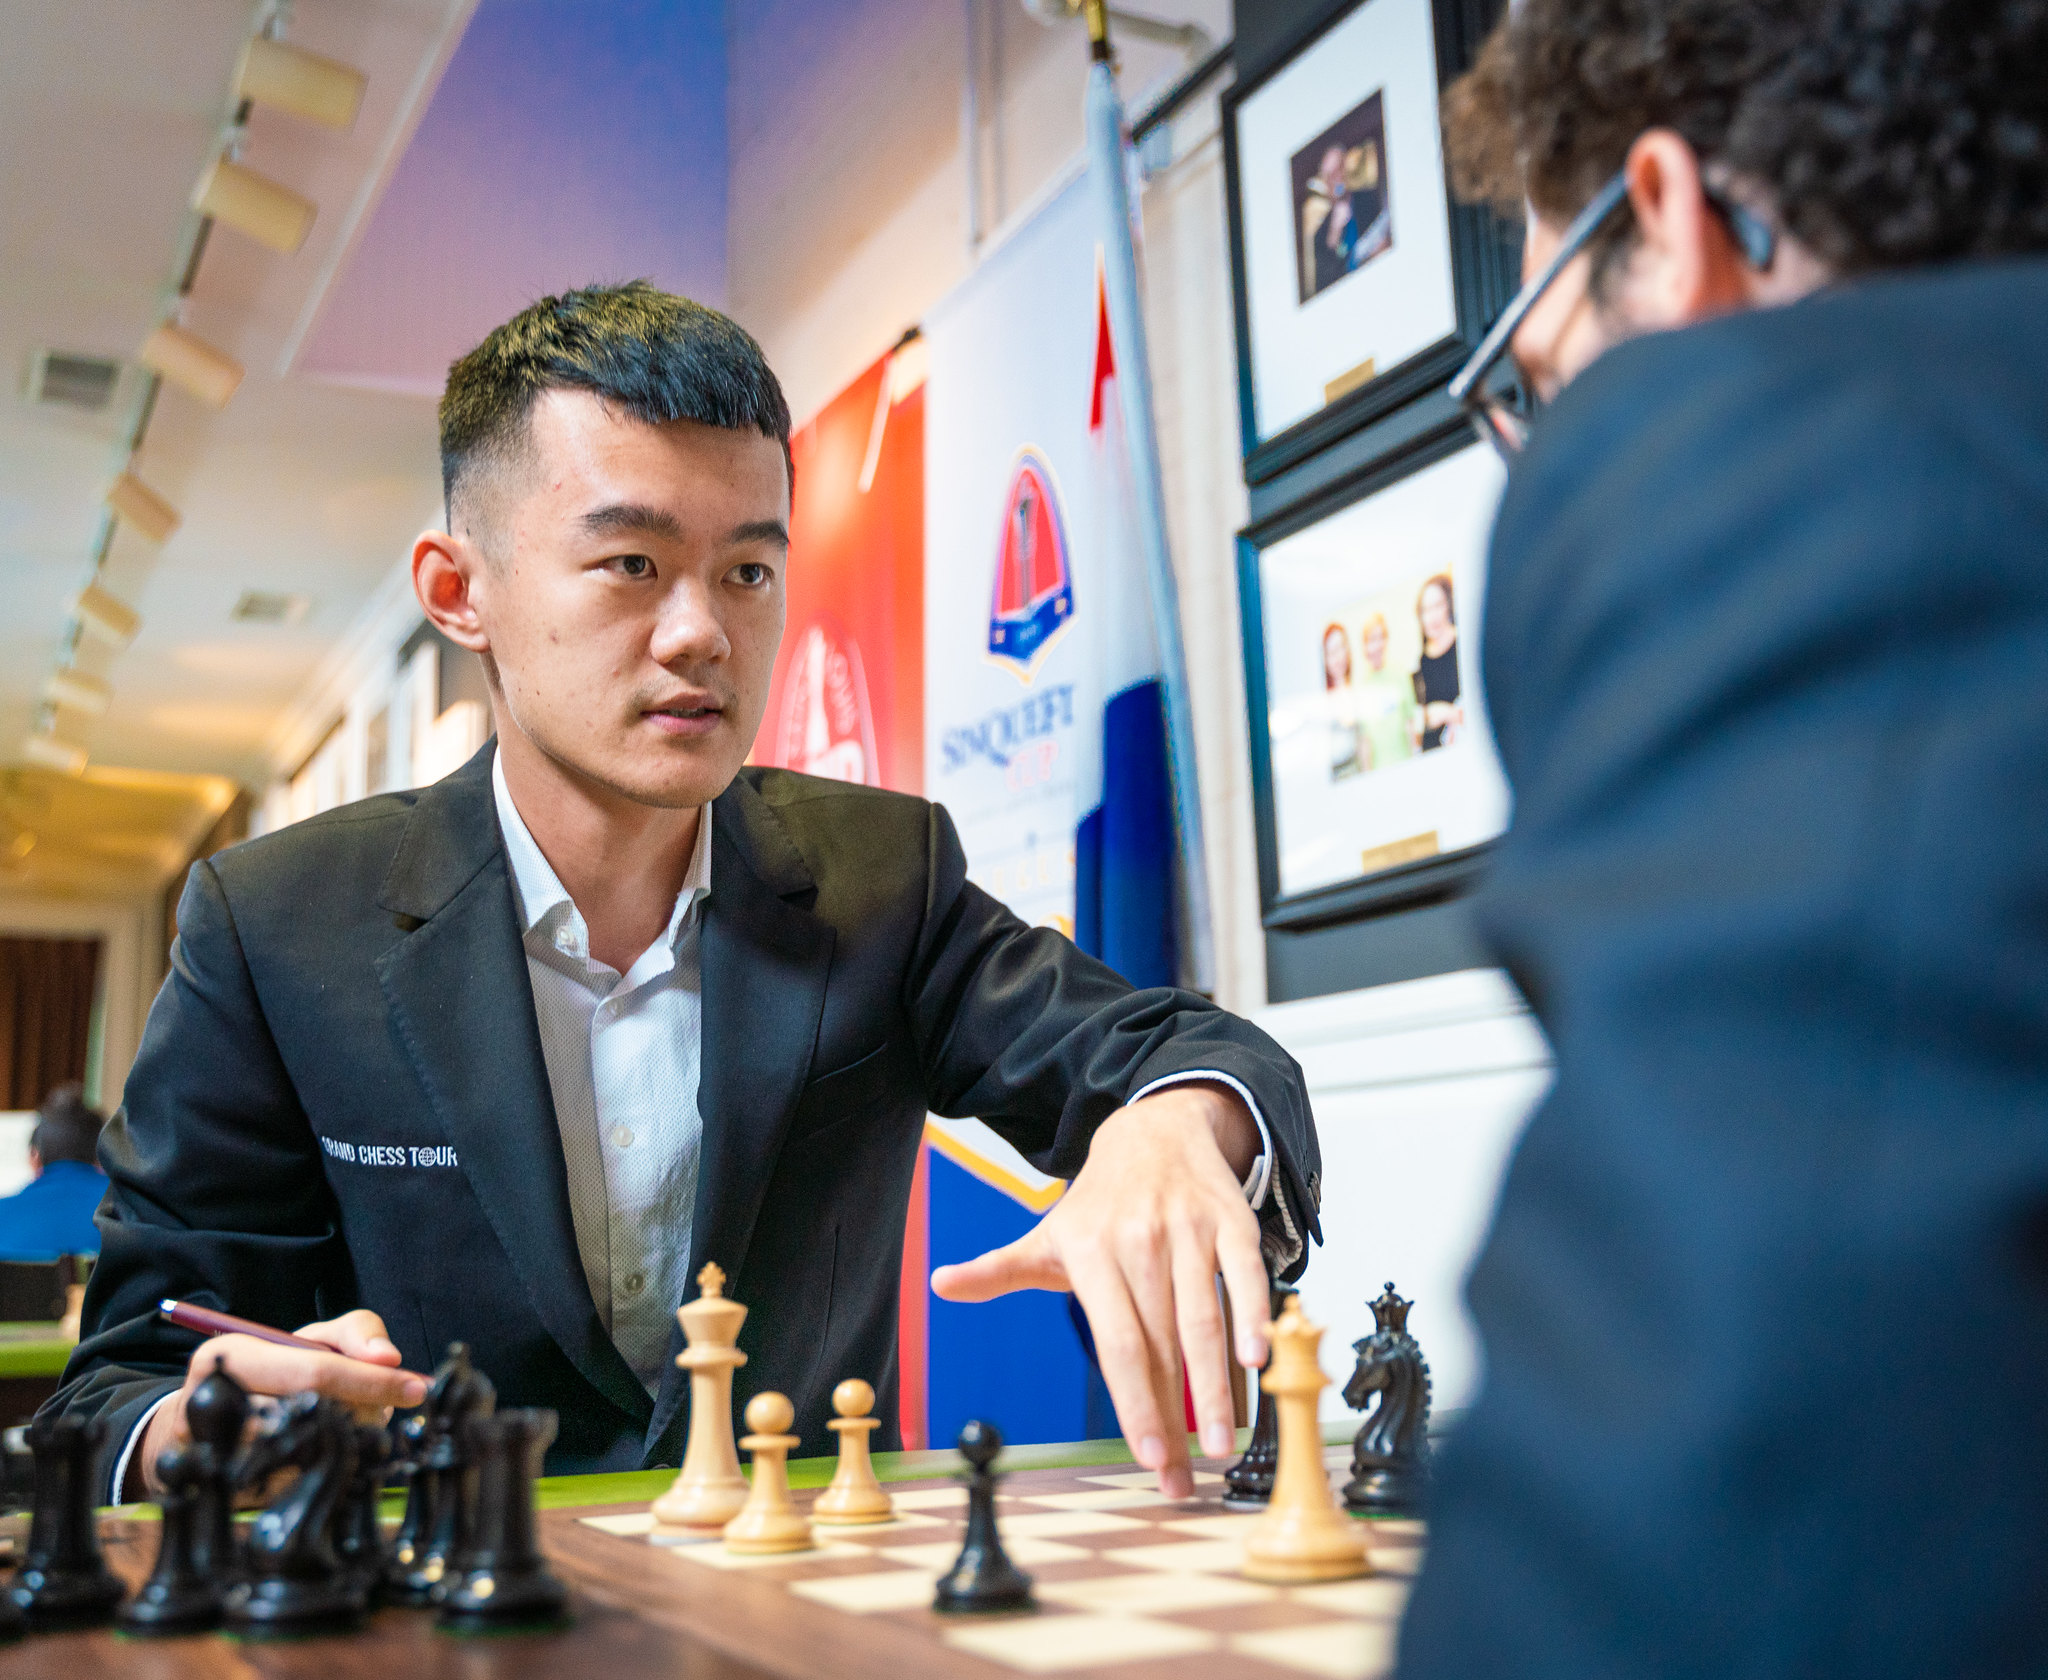 Ding Liren wins the first match of the Chessable Masters Final